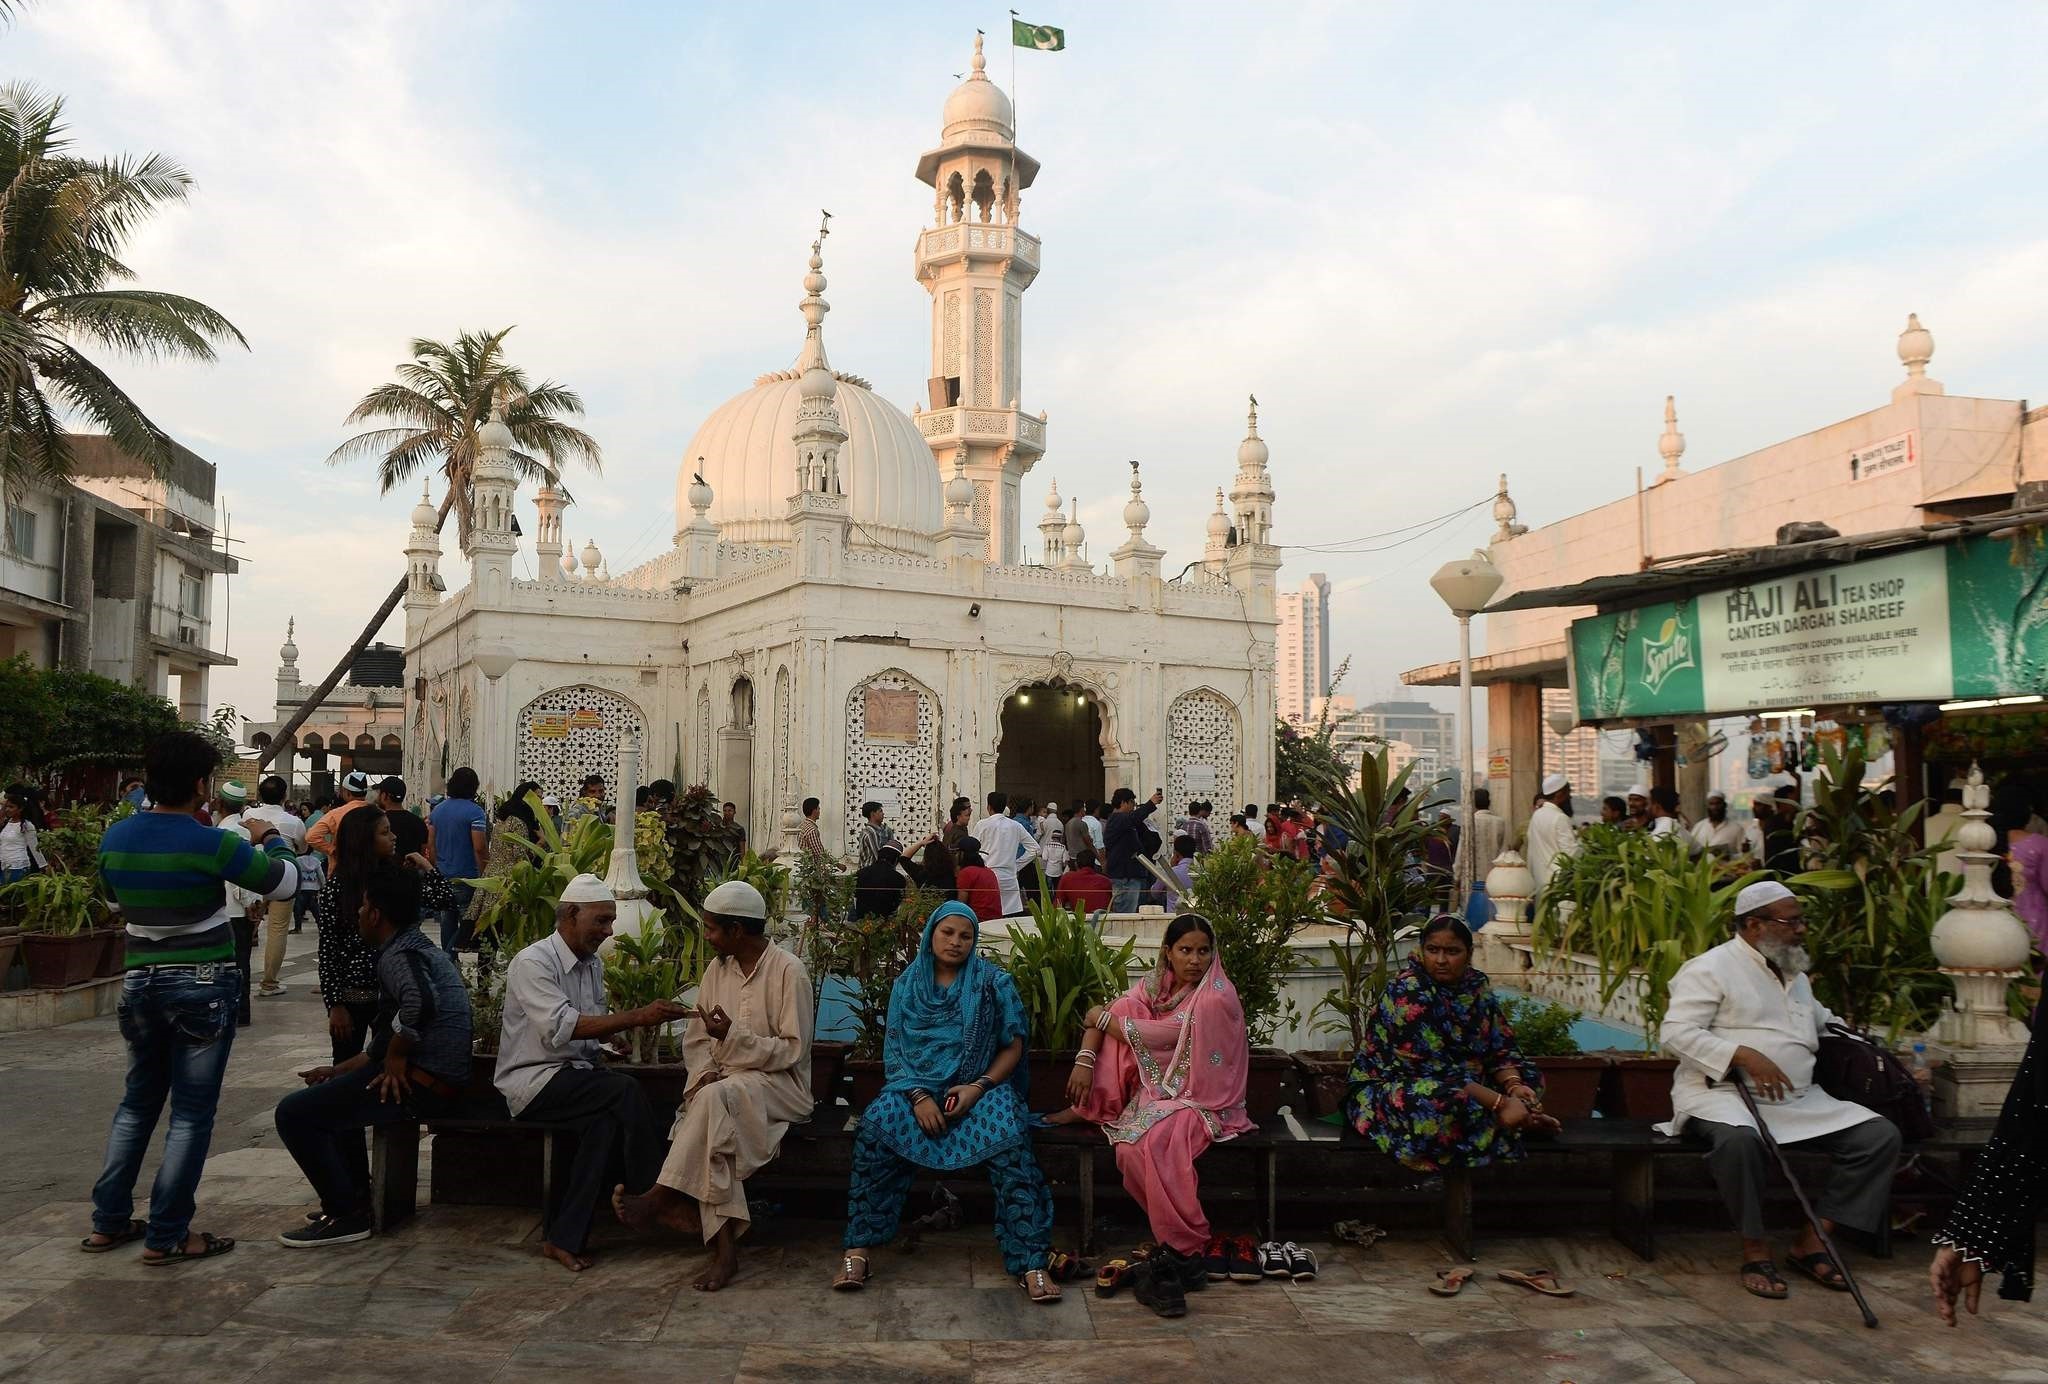 In this photograph taken on December 9, 2015, Indian Muslims and visitors are seen at the Haji Ali Dargah in Mumbai. (AFP Photo)